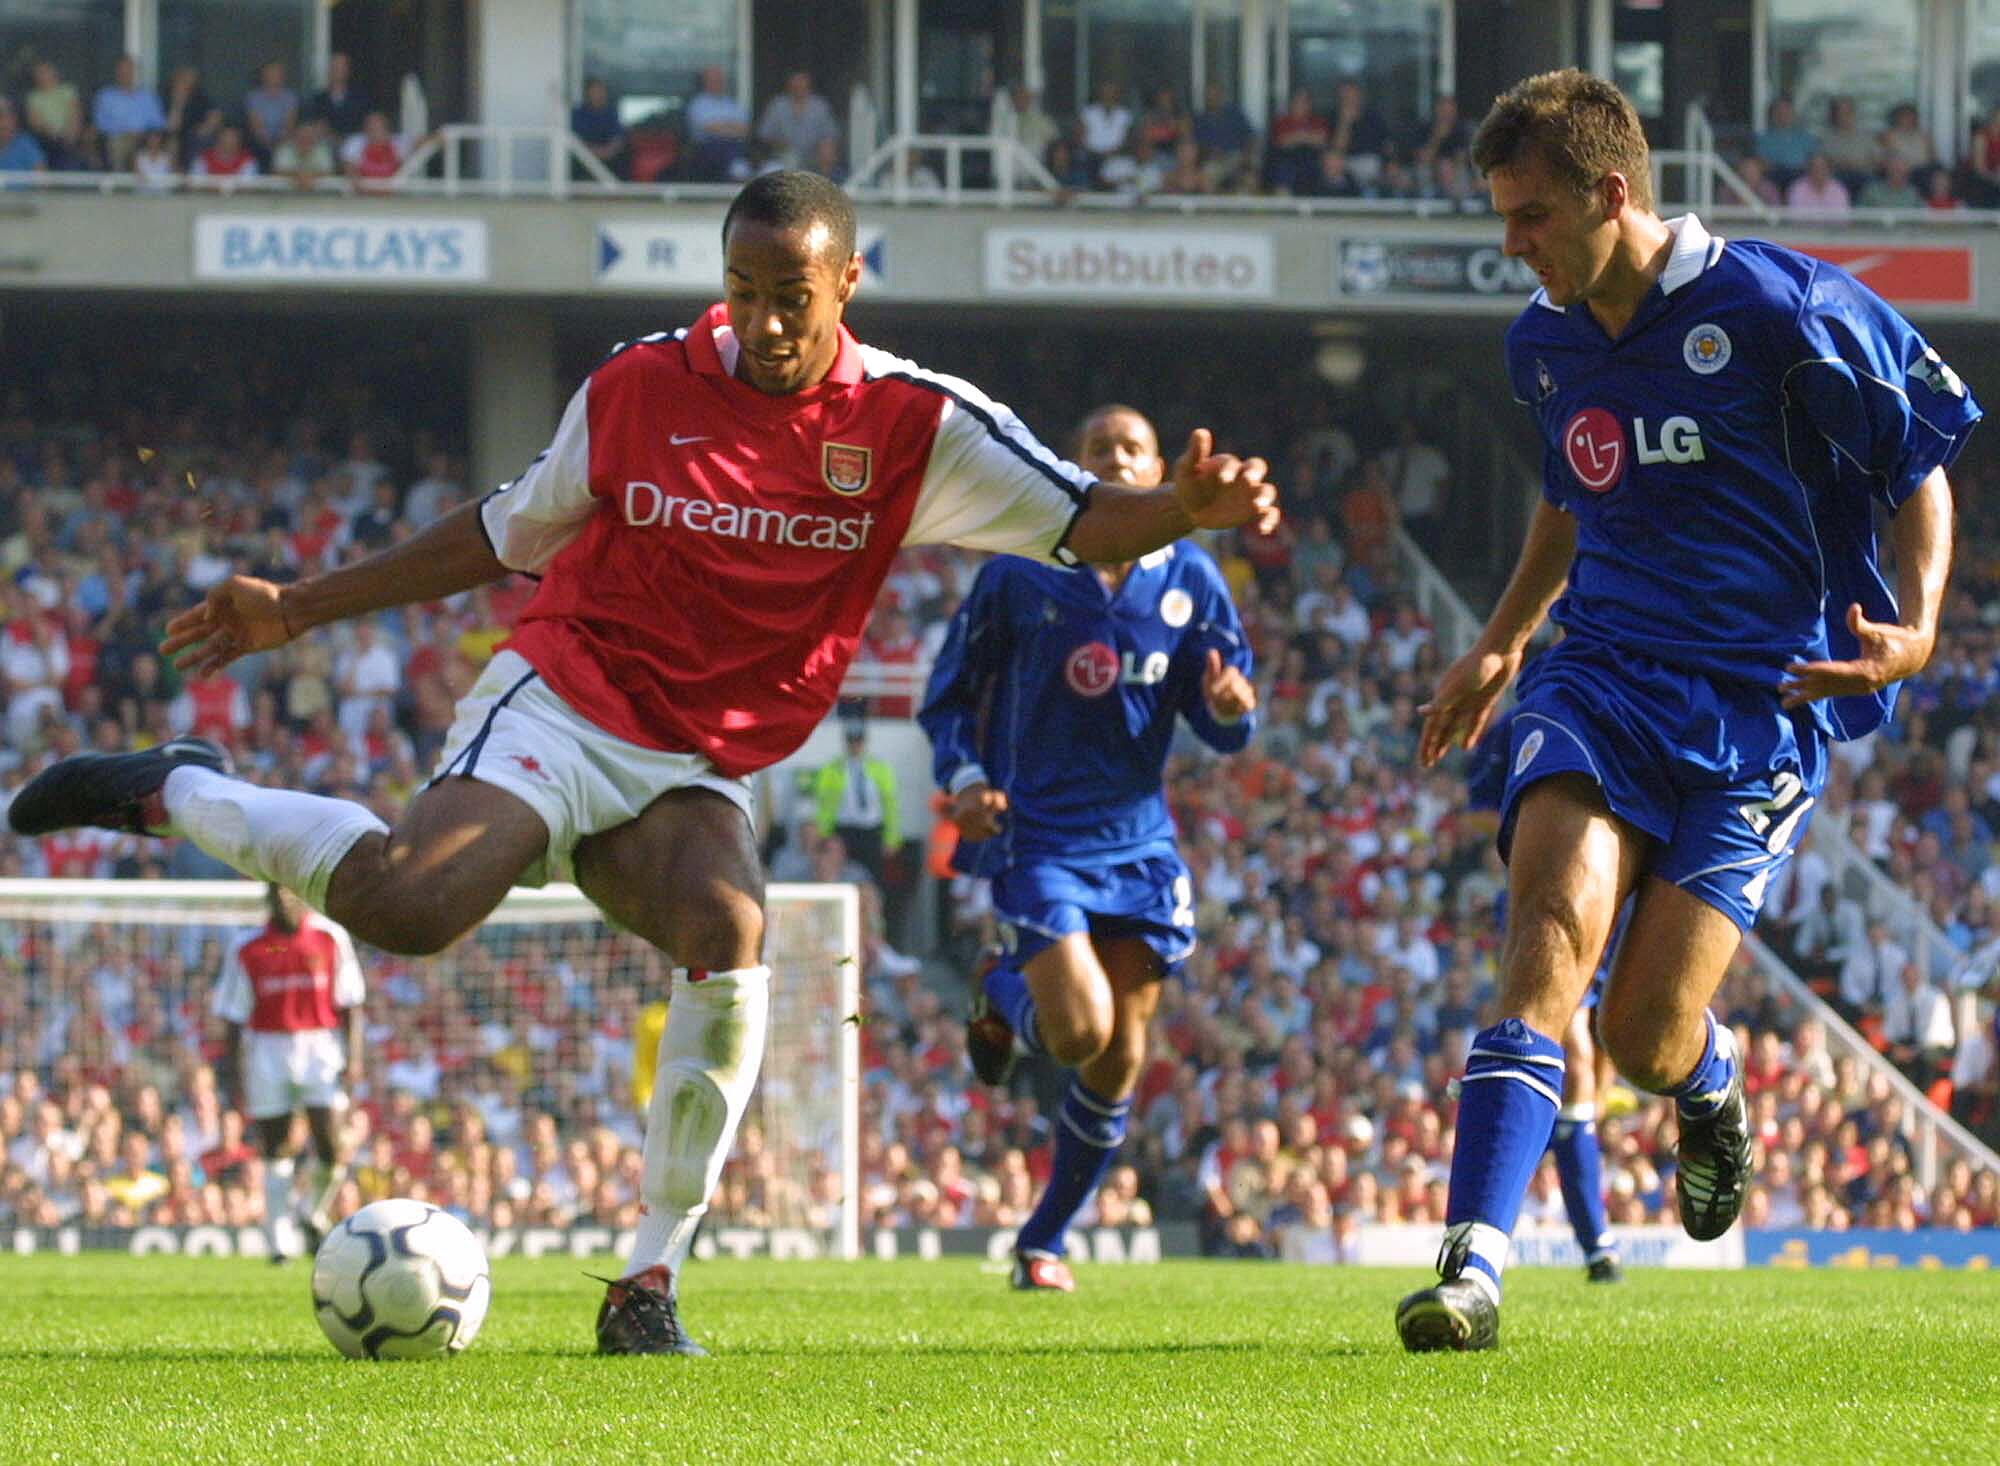 In 2001, Arsenal's Thierry Henry is shown fending off a challenge by a Leicester City player 